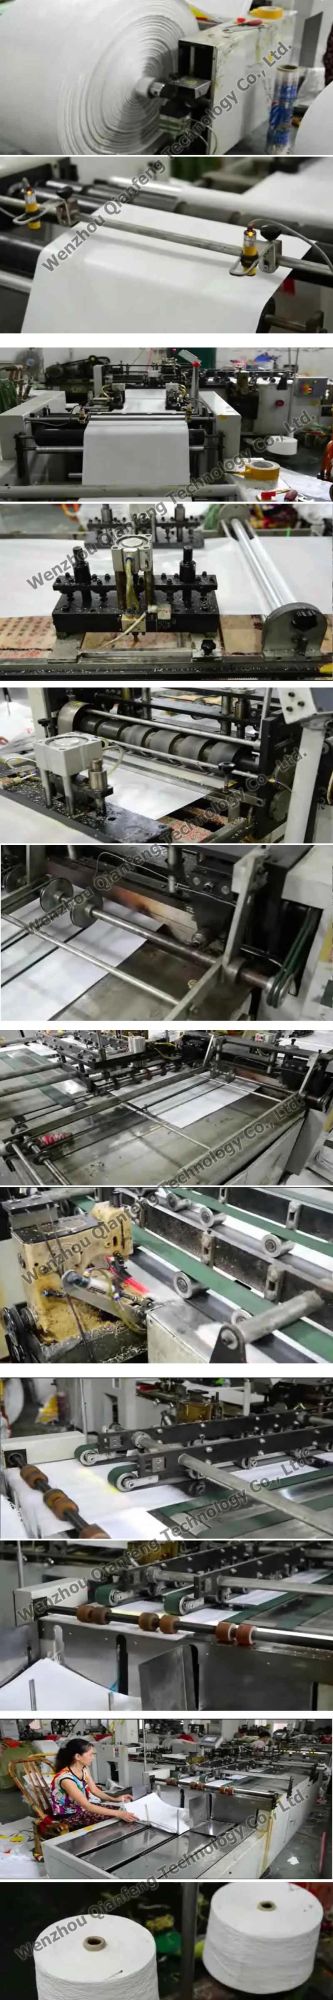 High Speed Auto Cutting and Sewing Machine for Printed Plastic Woven Sack